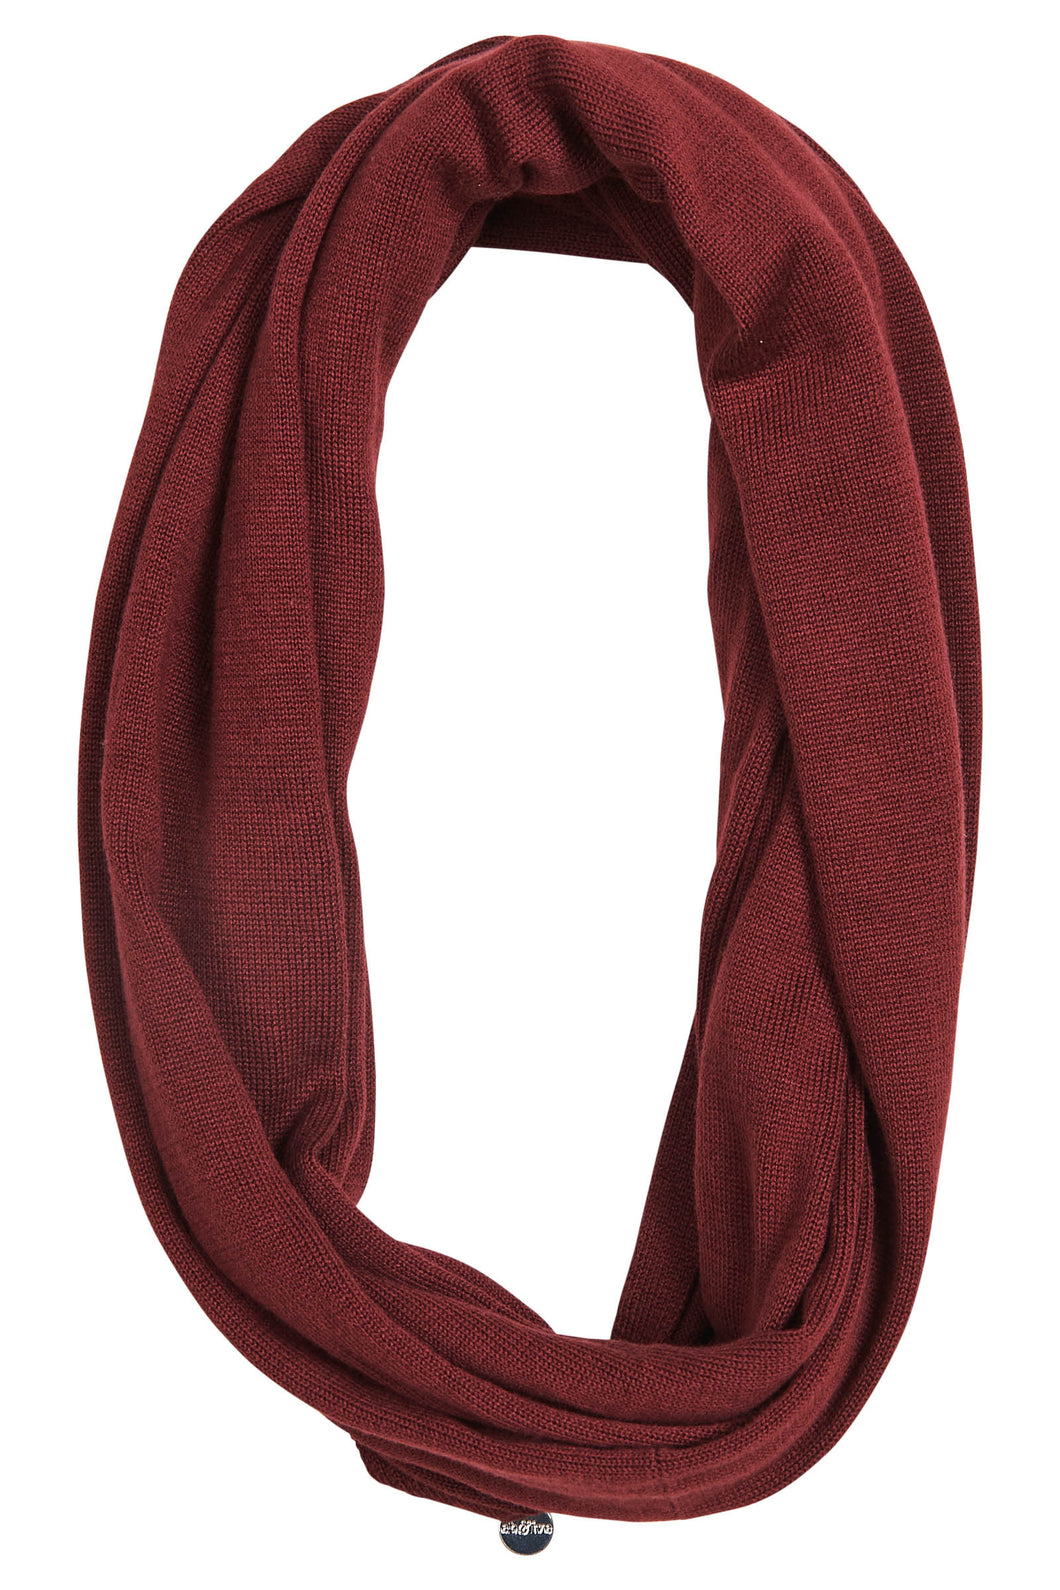 Eb&Ive - Astor Snood in Mulberry